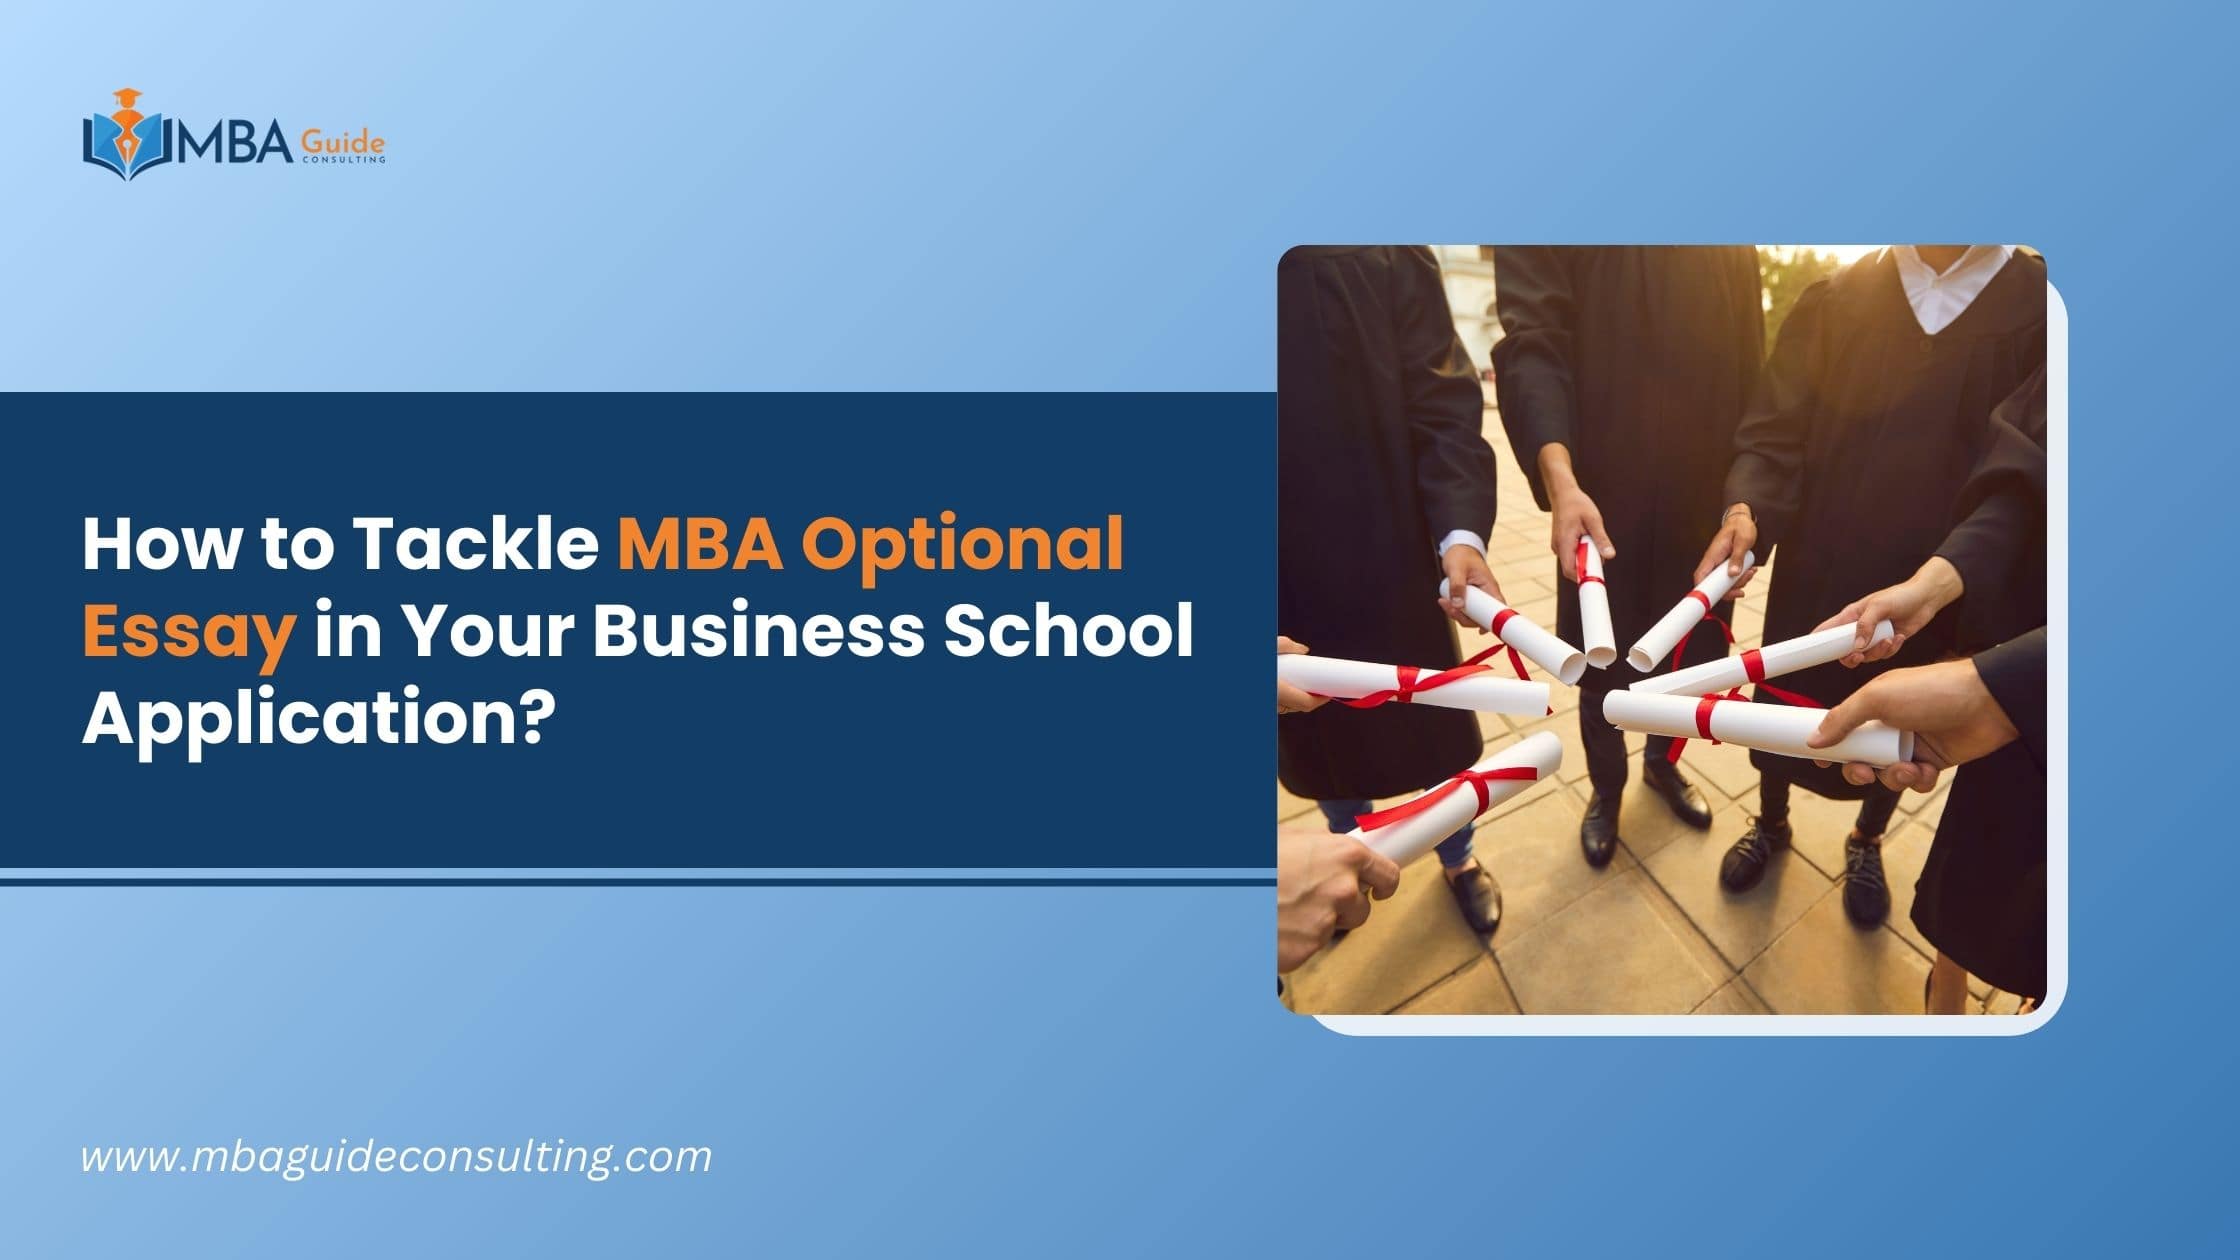 How to Tackle MBA Optional Essays in Your Business School Application